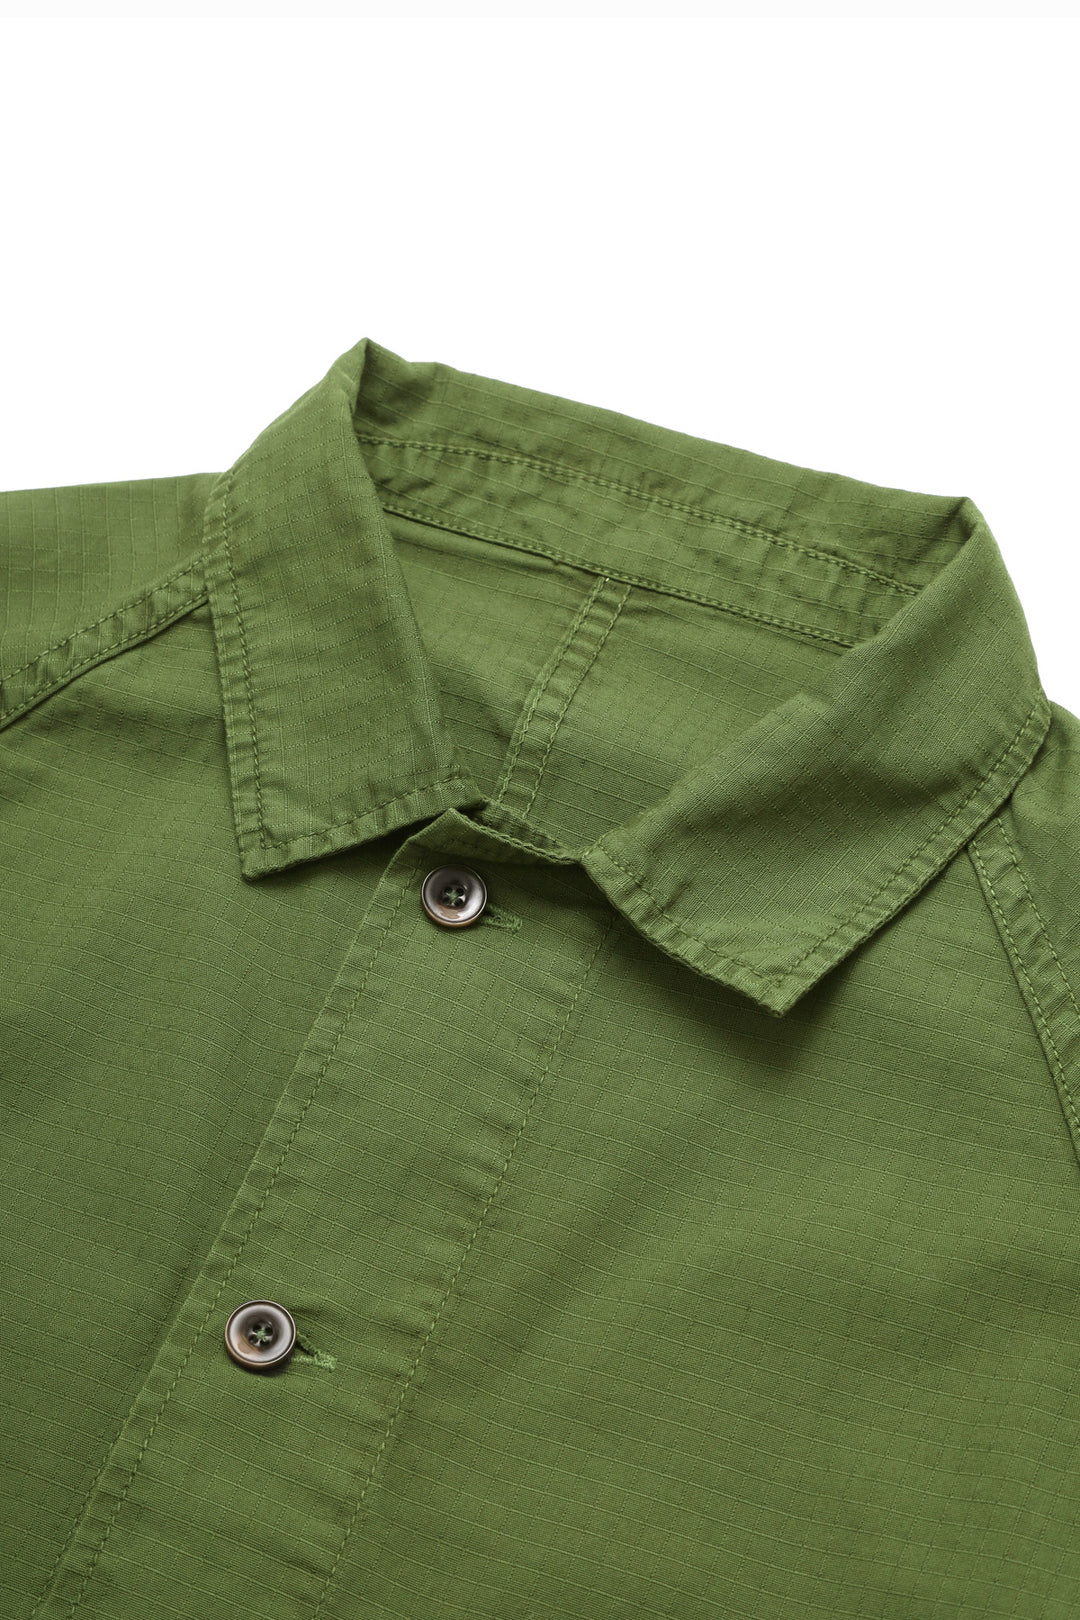 Service Works - Ripstop Front Of House Jacket - Pesto